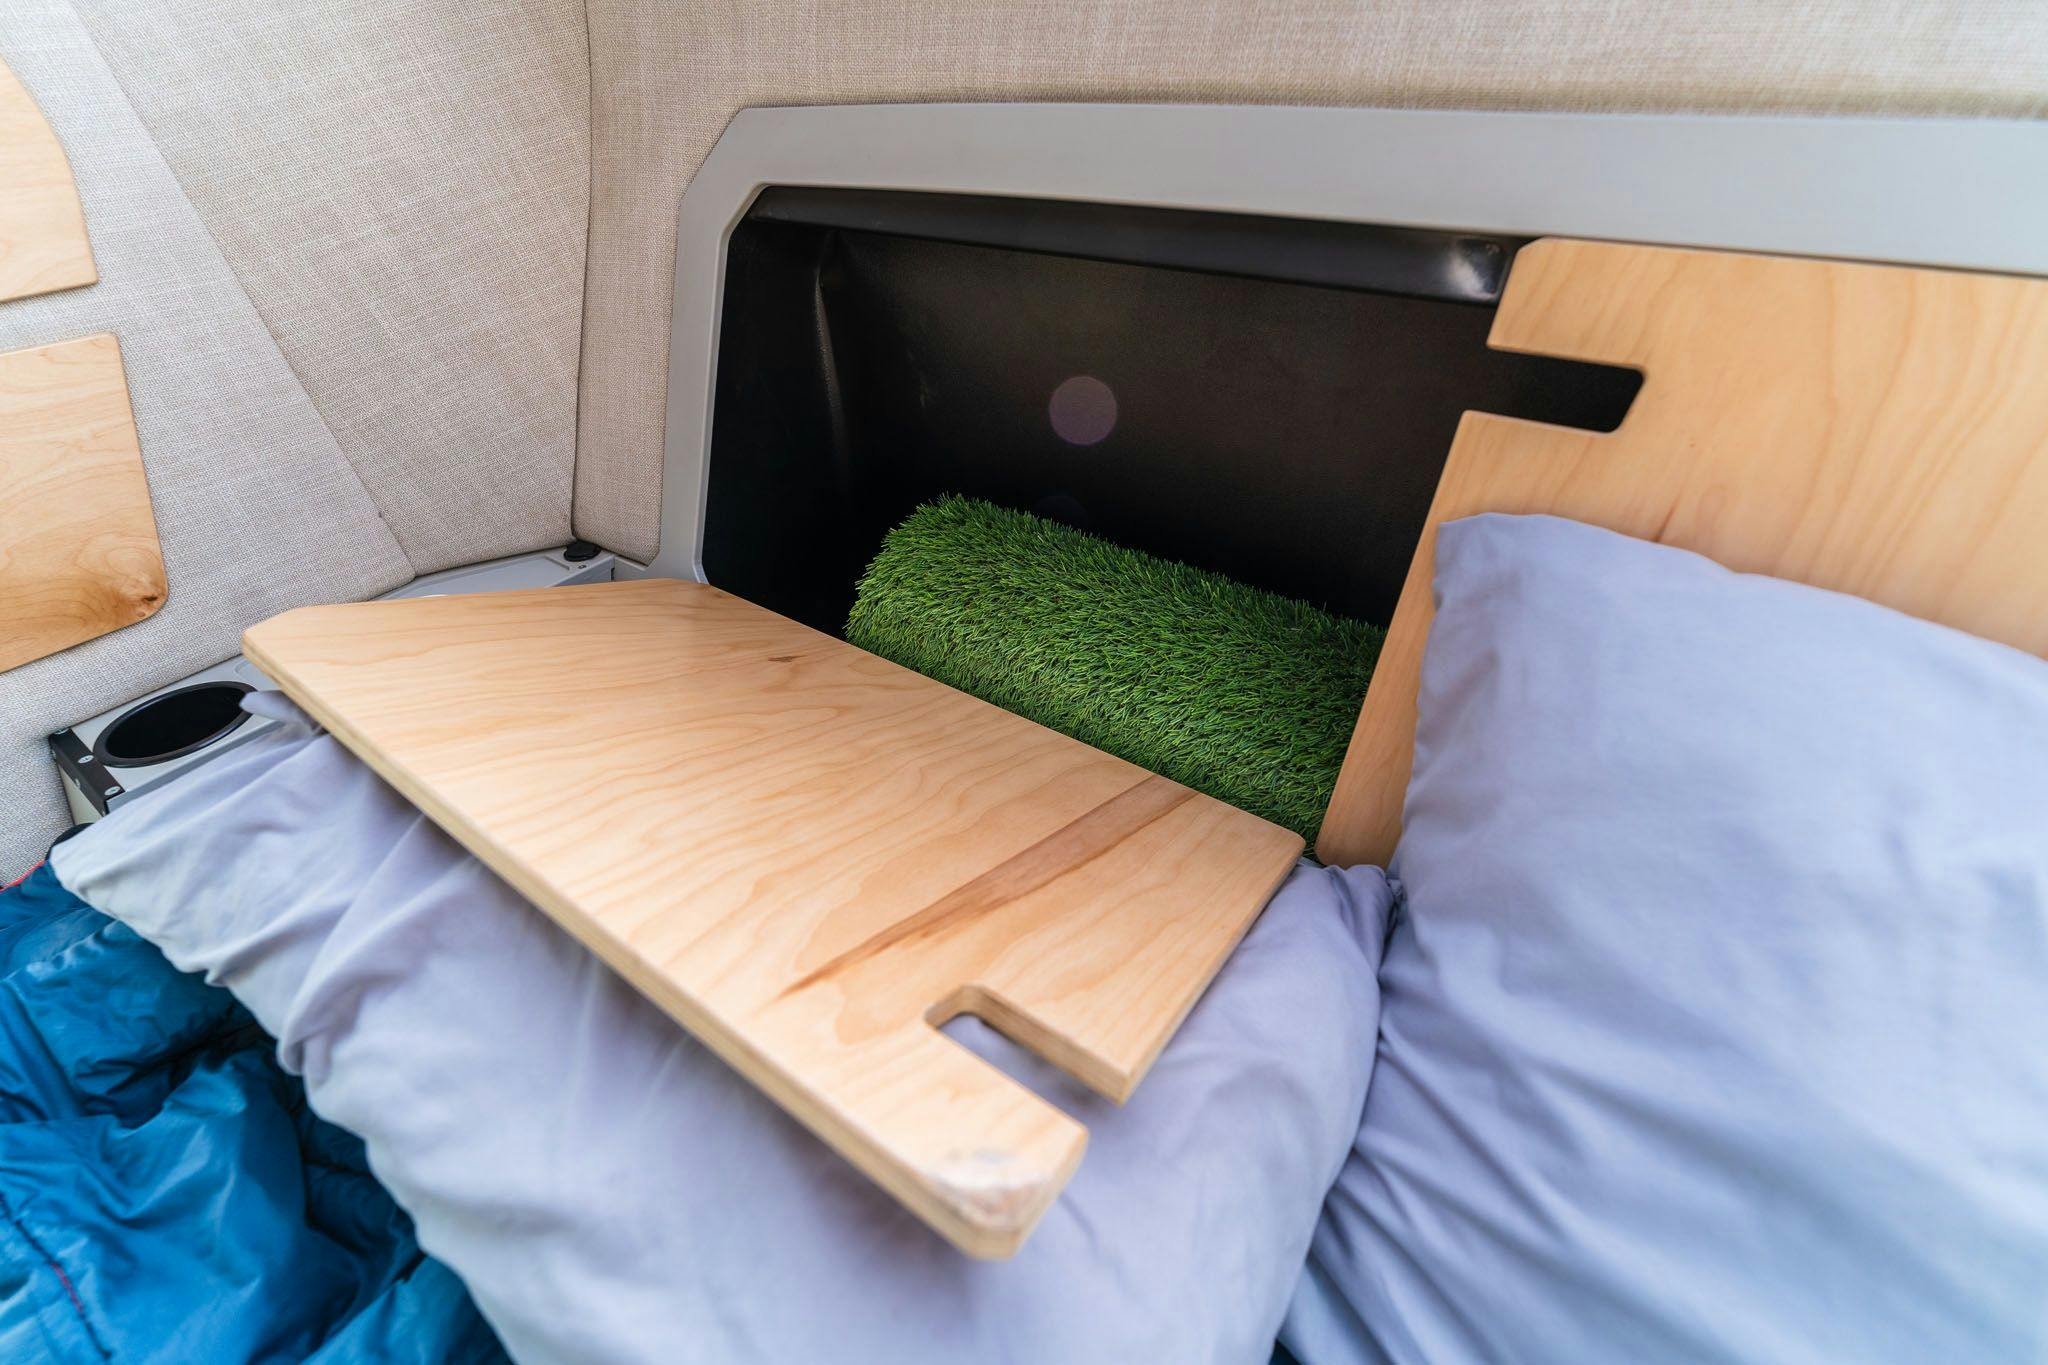 In the cabin of the TOPO2, an offroad trailer, the headboard has two panels that fold down to reveal additional storage space.